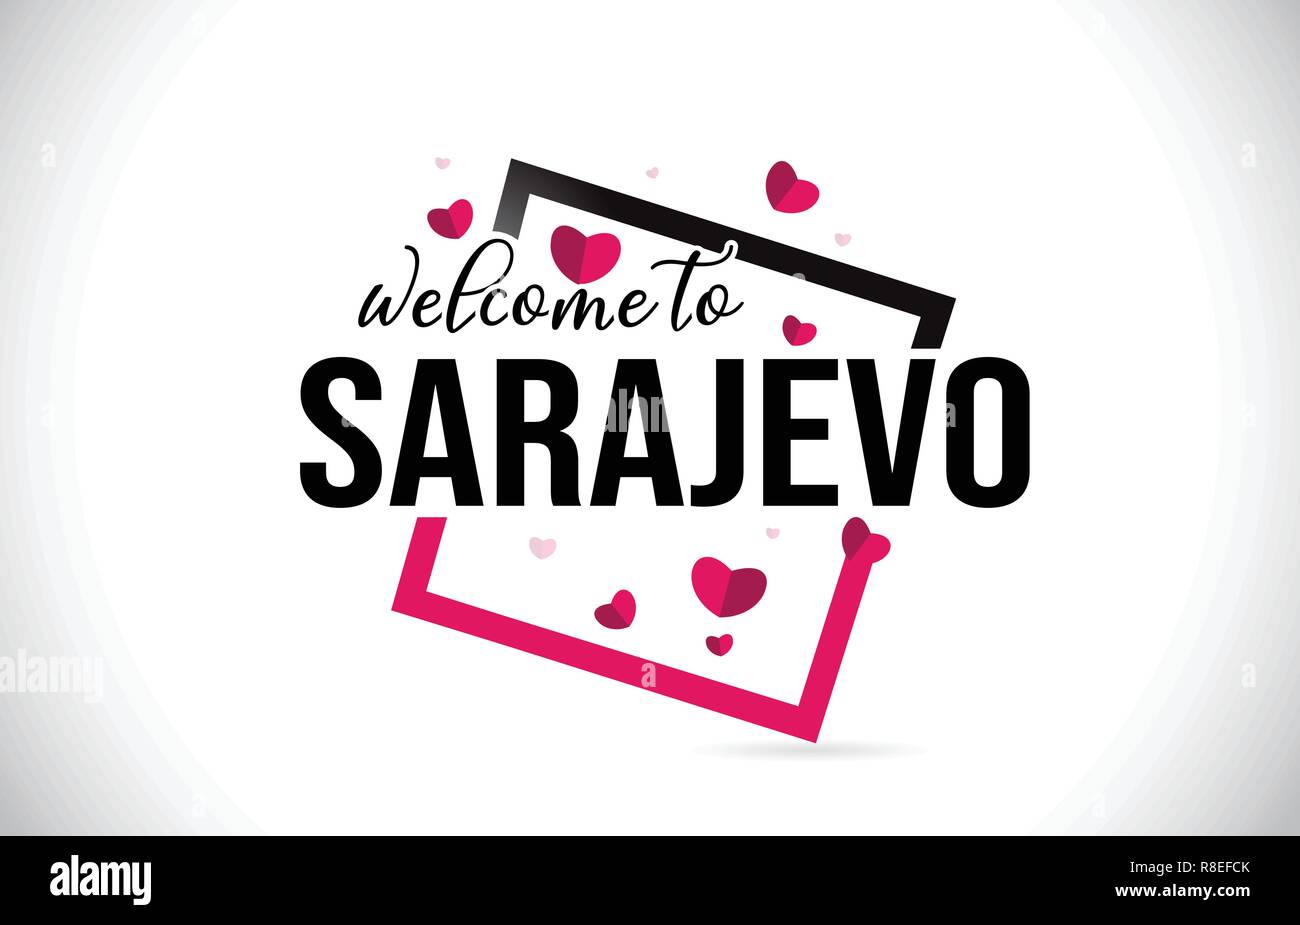 Sarajevo Welcome To Word Text with Handwritten Font and  Red Hearts Square Design Illustration Vector. Stock Vector